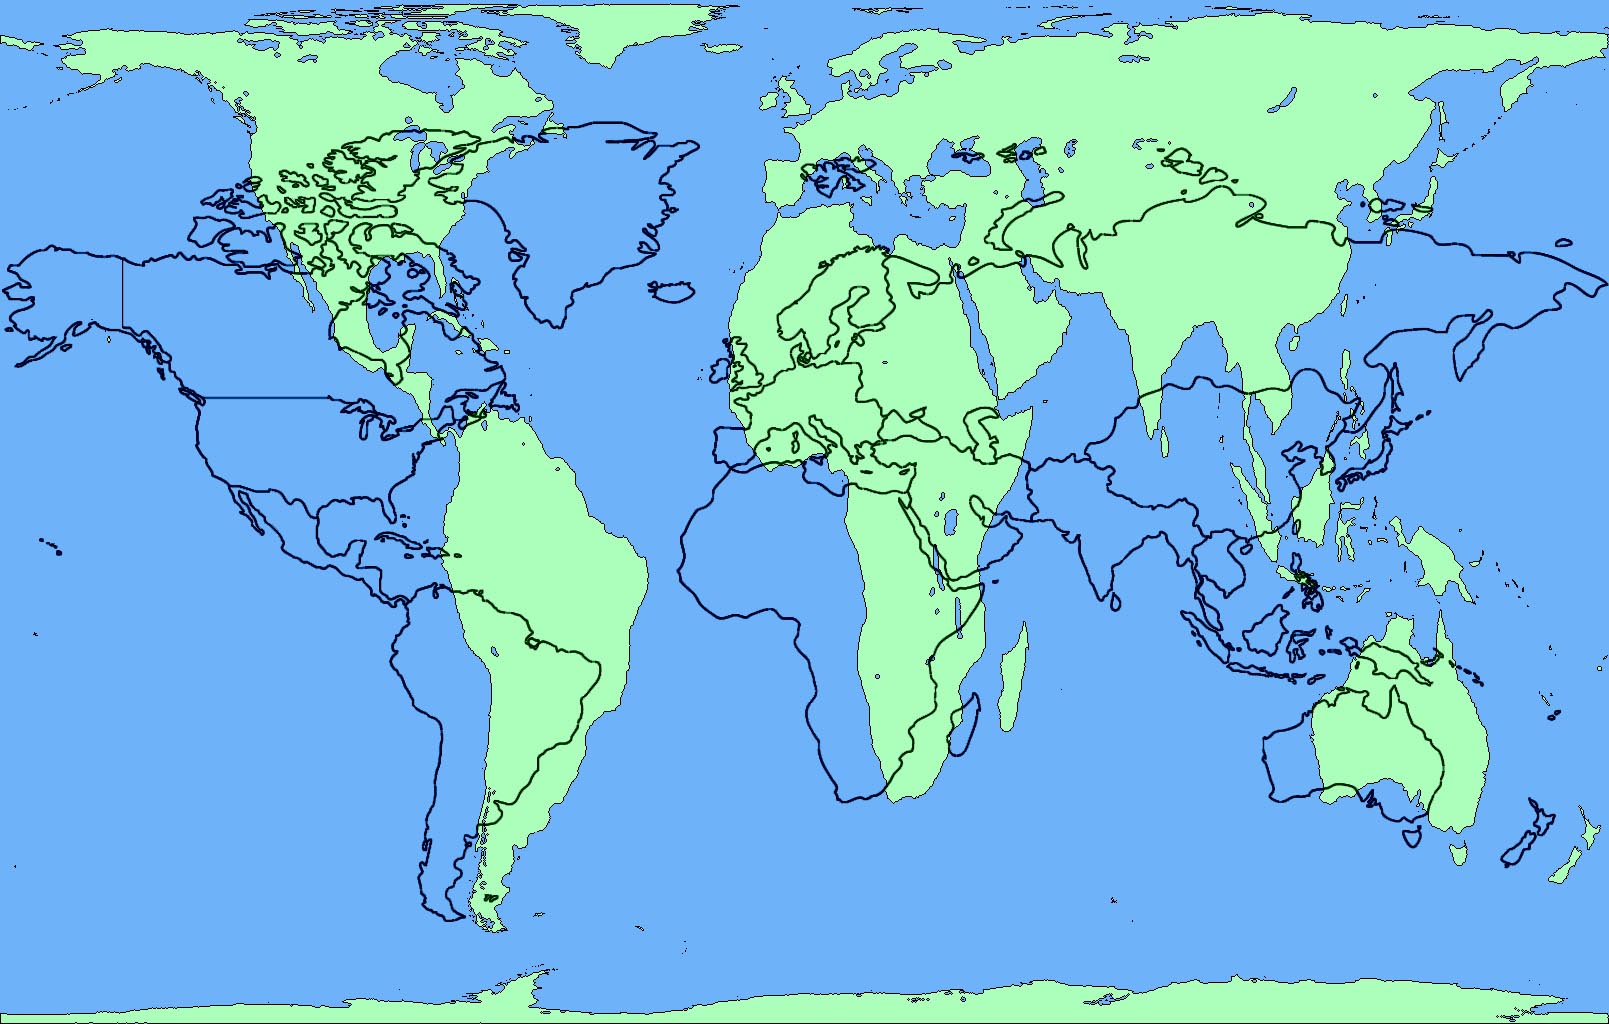 peters-projection-comparison-world-map